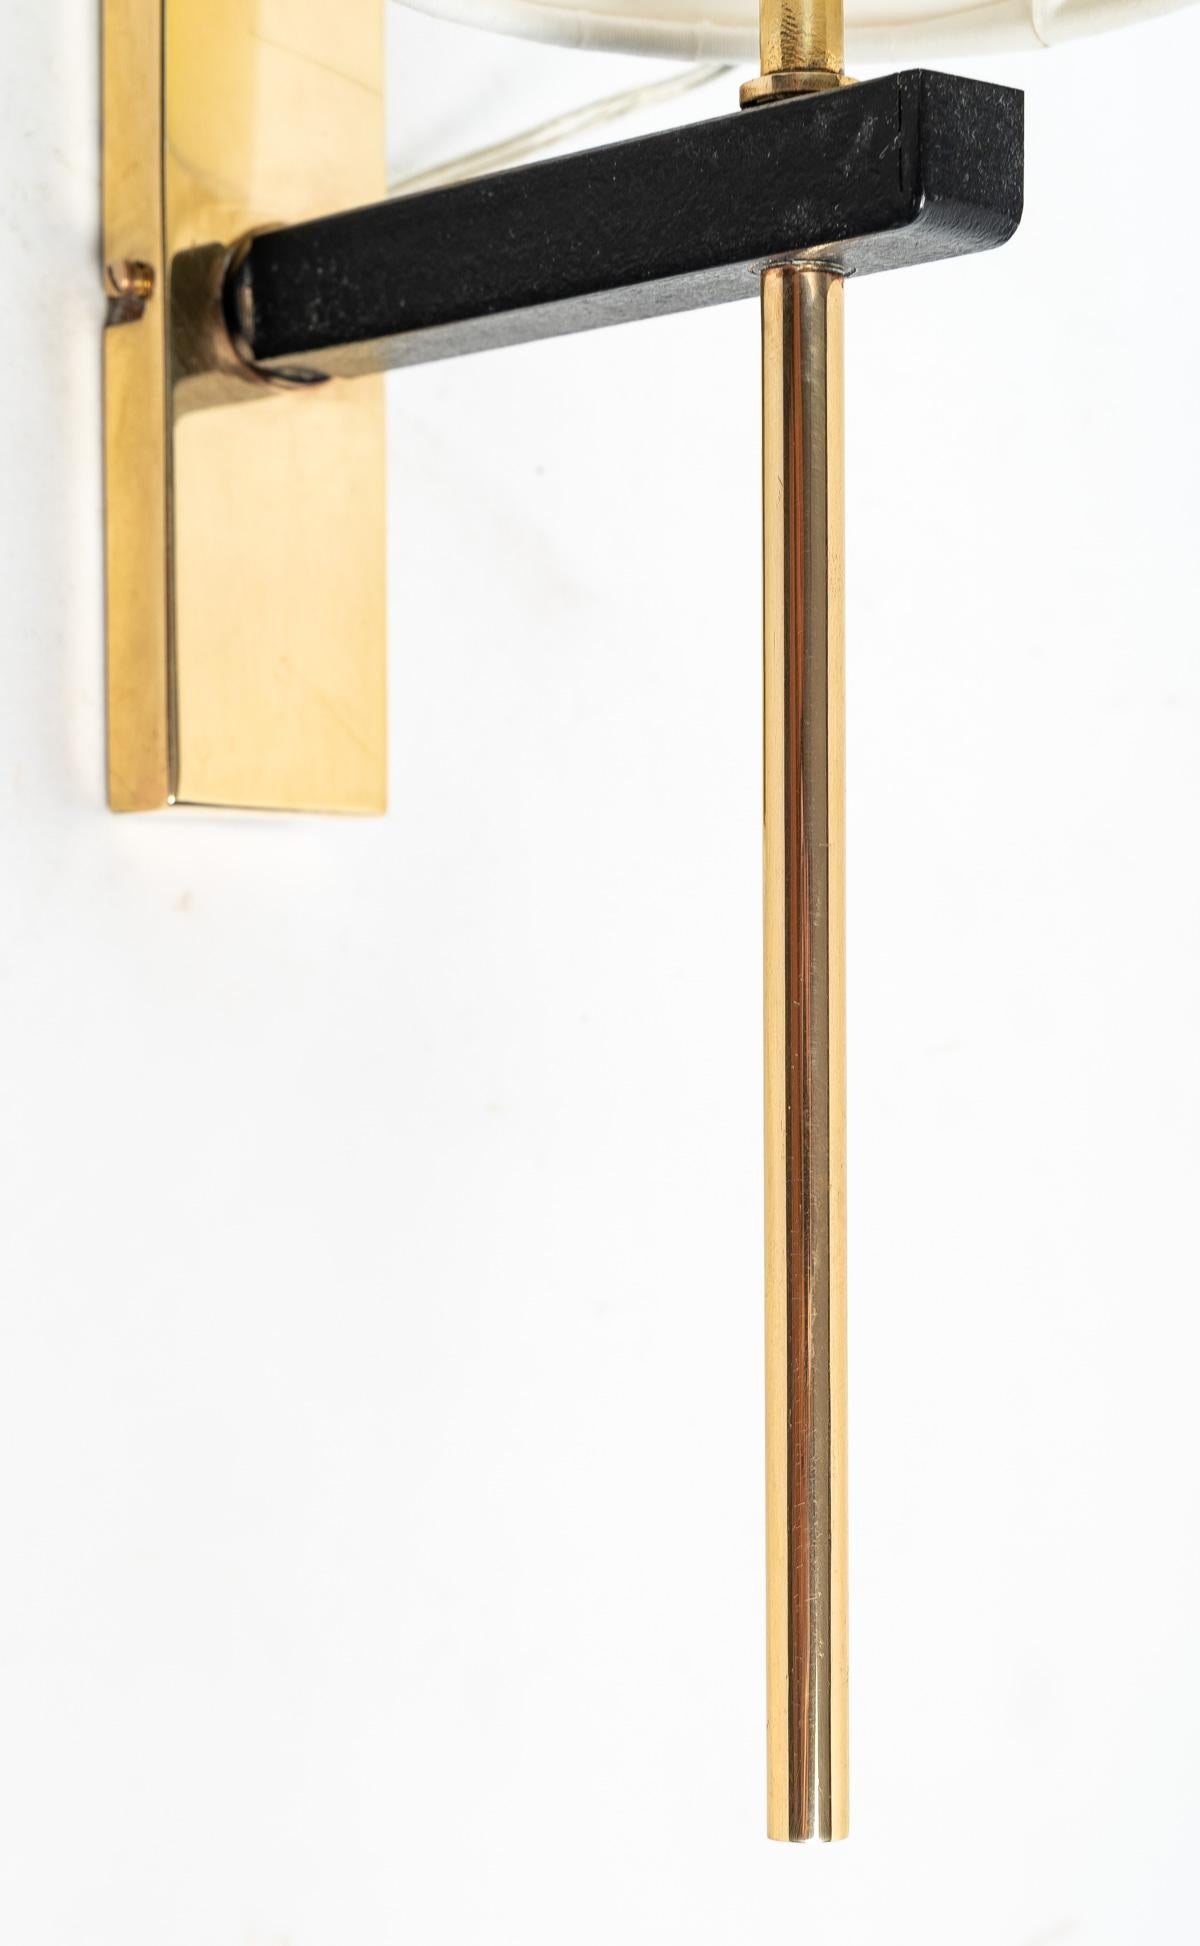 Composed of a wall support in gilded brass of rectangular form on which is posed a small black arm supporting a long stem in gilded brass crossing the end of the black arm and dressed on the high part of a lampshade of cylindrical form of off-white